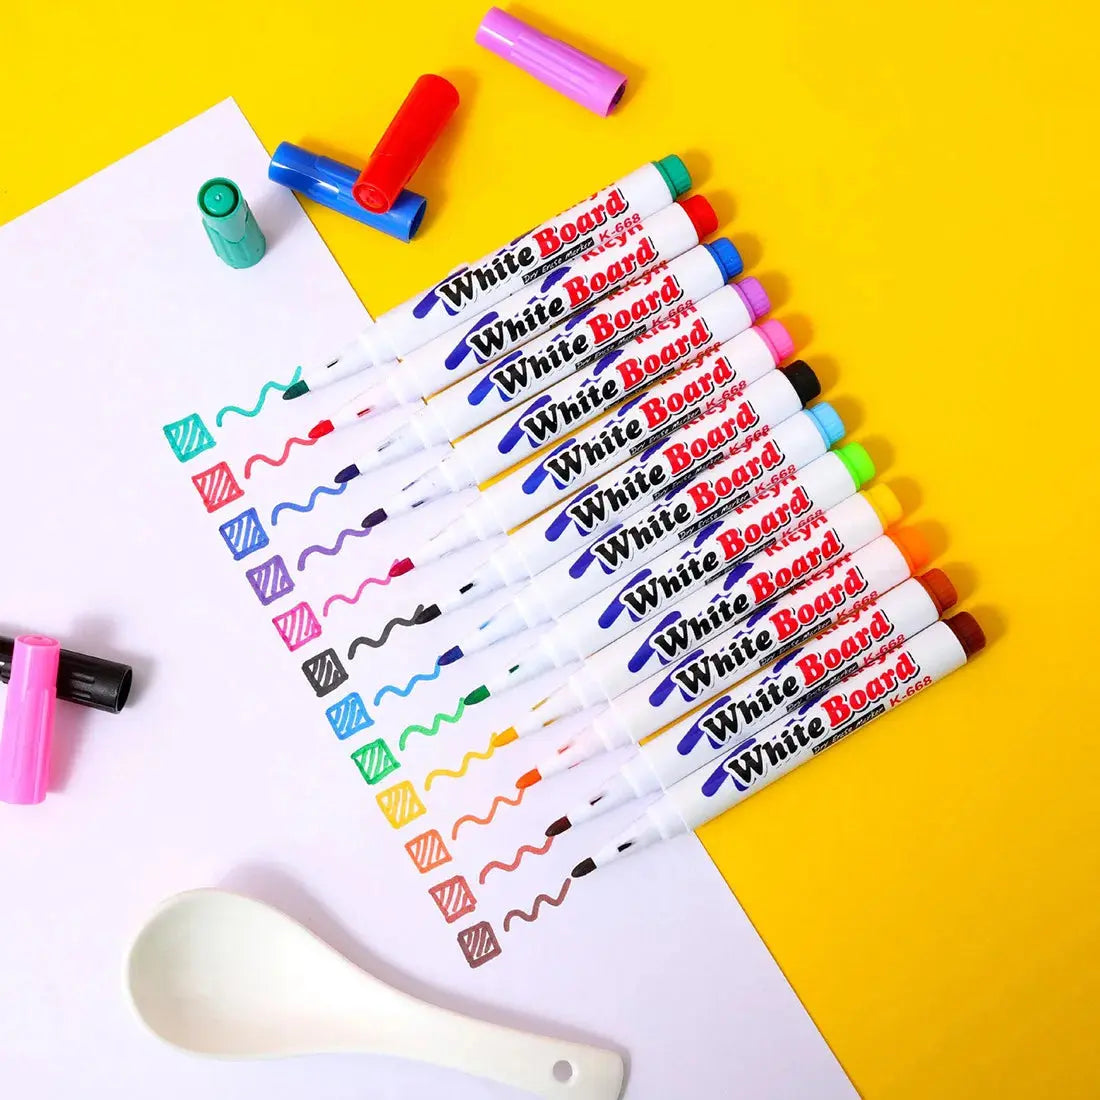 Watercolor Magic Pen Set for Children's Montessori Early Education - Floating Ink Markers, Doodle Water Pens - OFFICIAL GO GET IT ENTERPRISE LLC